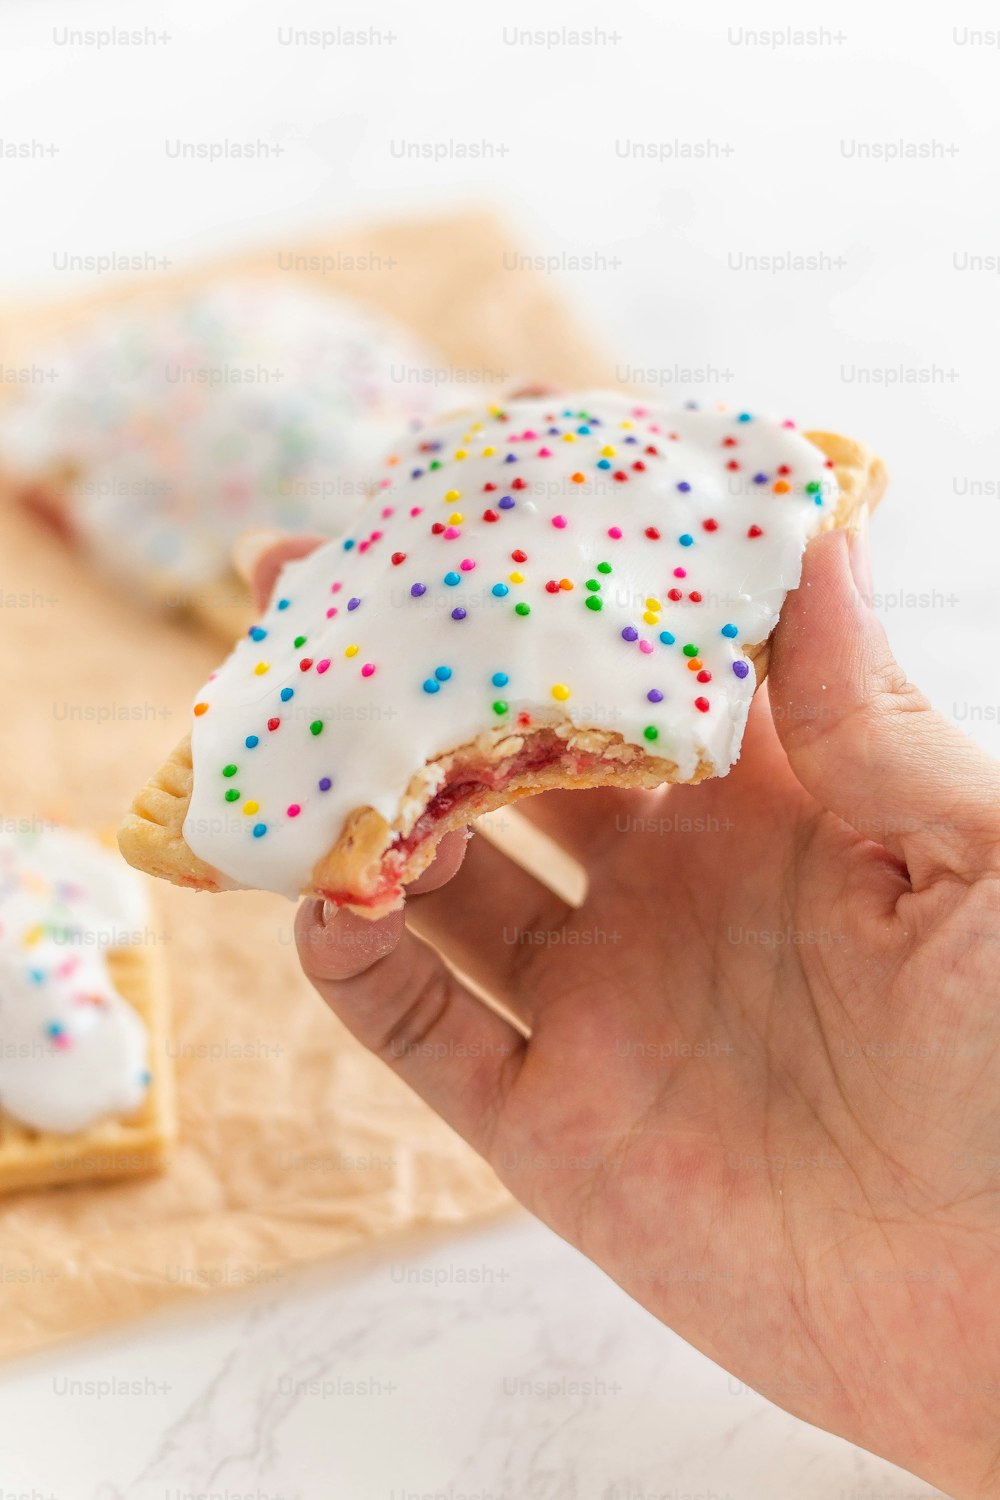 a hand holding a half eaten donut with sprinkles